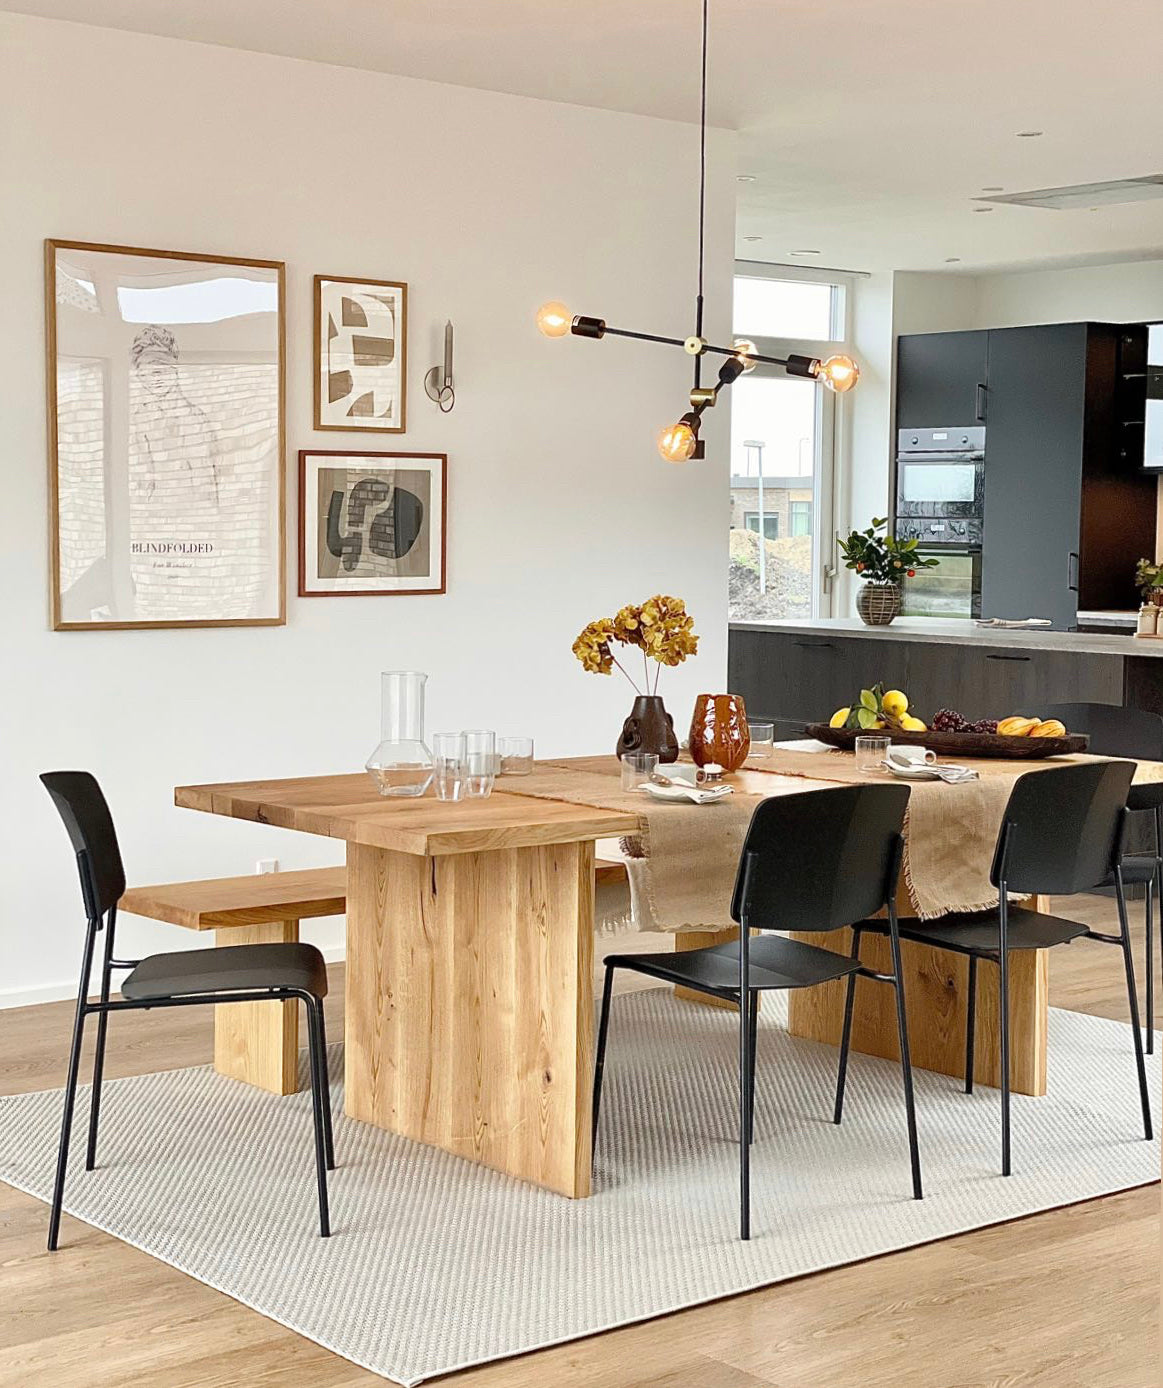 How a Wooden Table Can Add Coziness and Warmth to Your Space